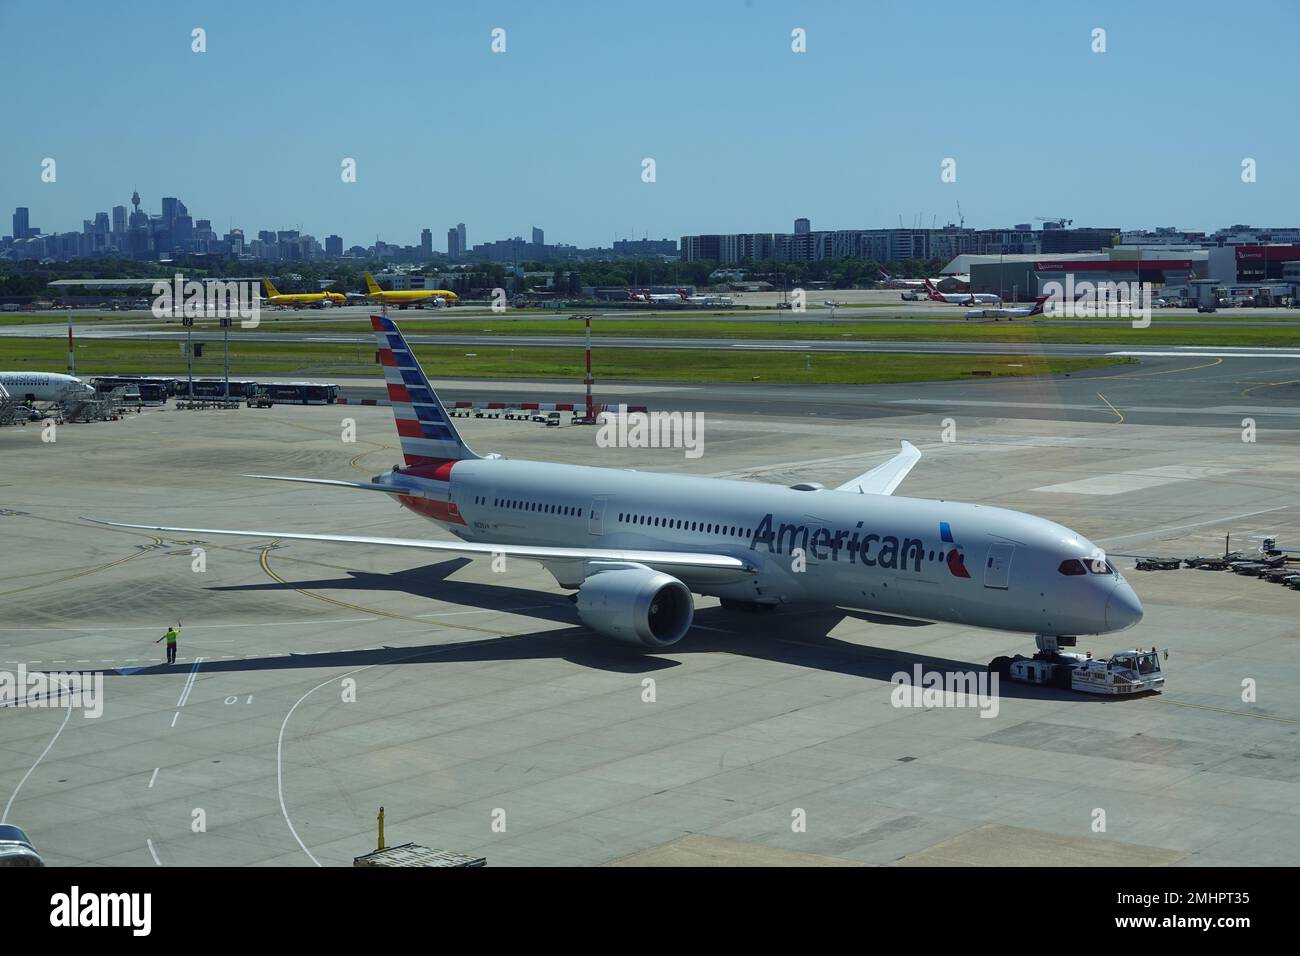 January 2023, American Airways plane at Sydney Kingsford Smith airport with Sydney city skyline in the distance. Stock Photo